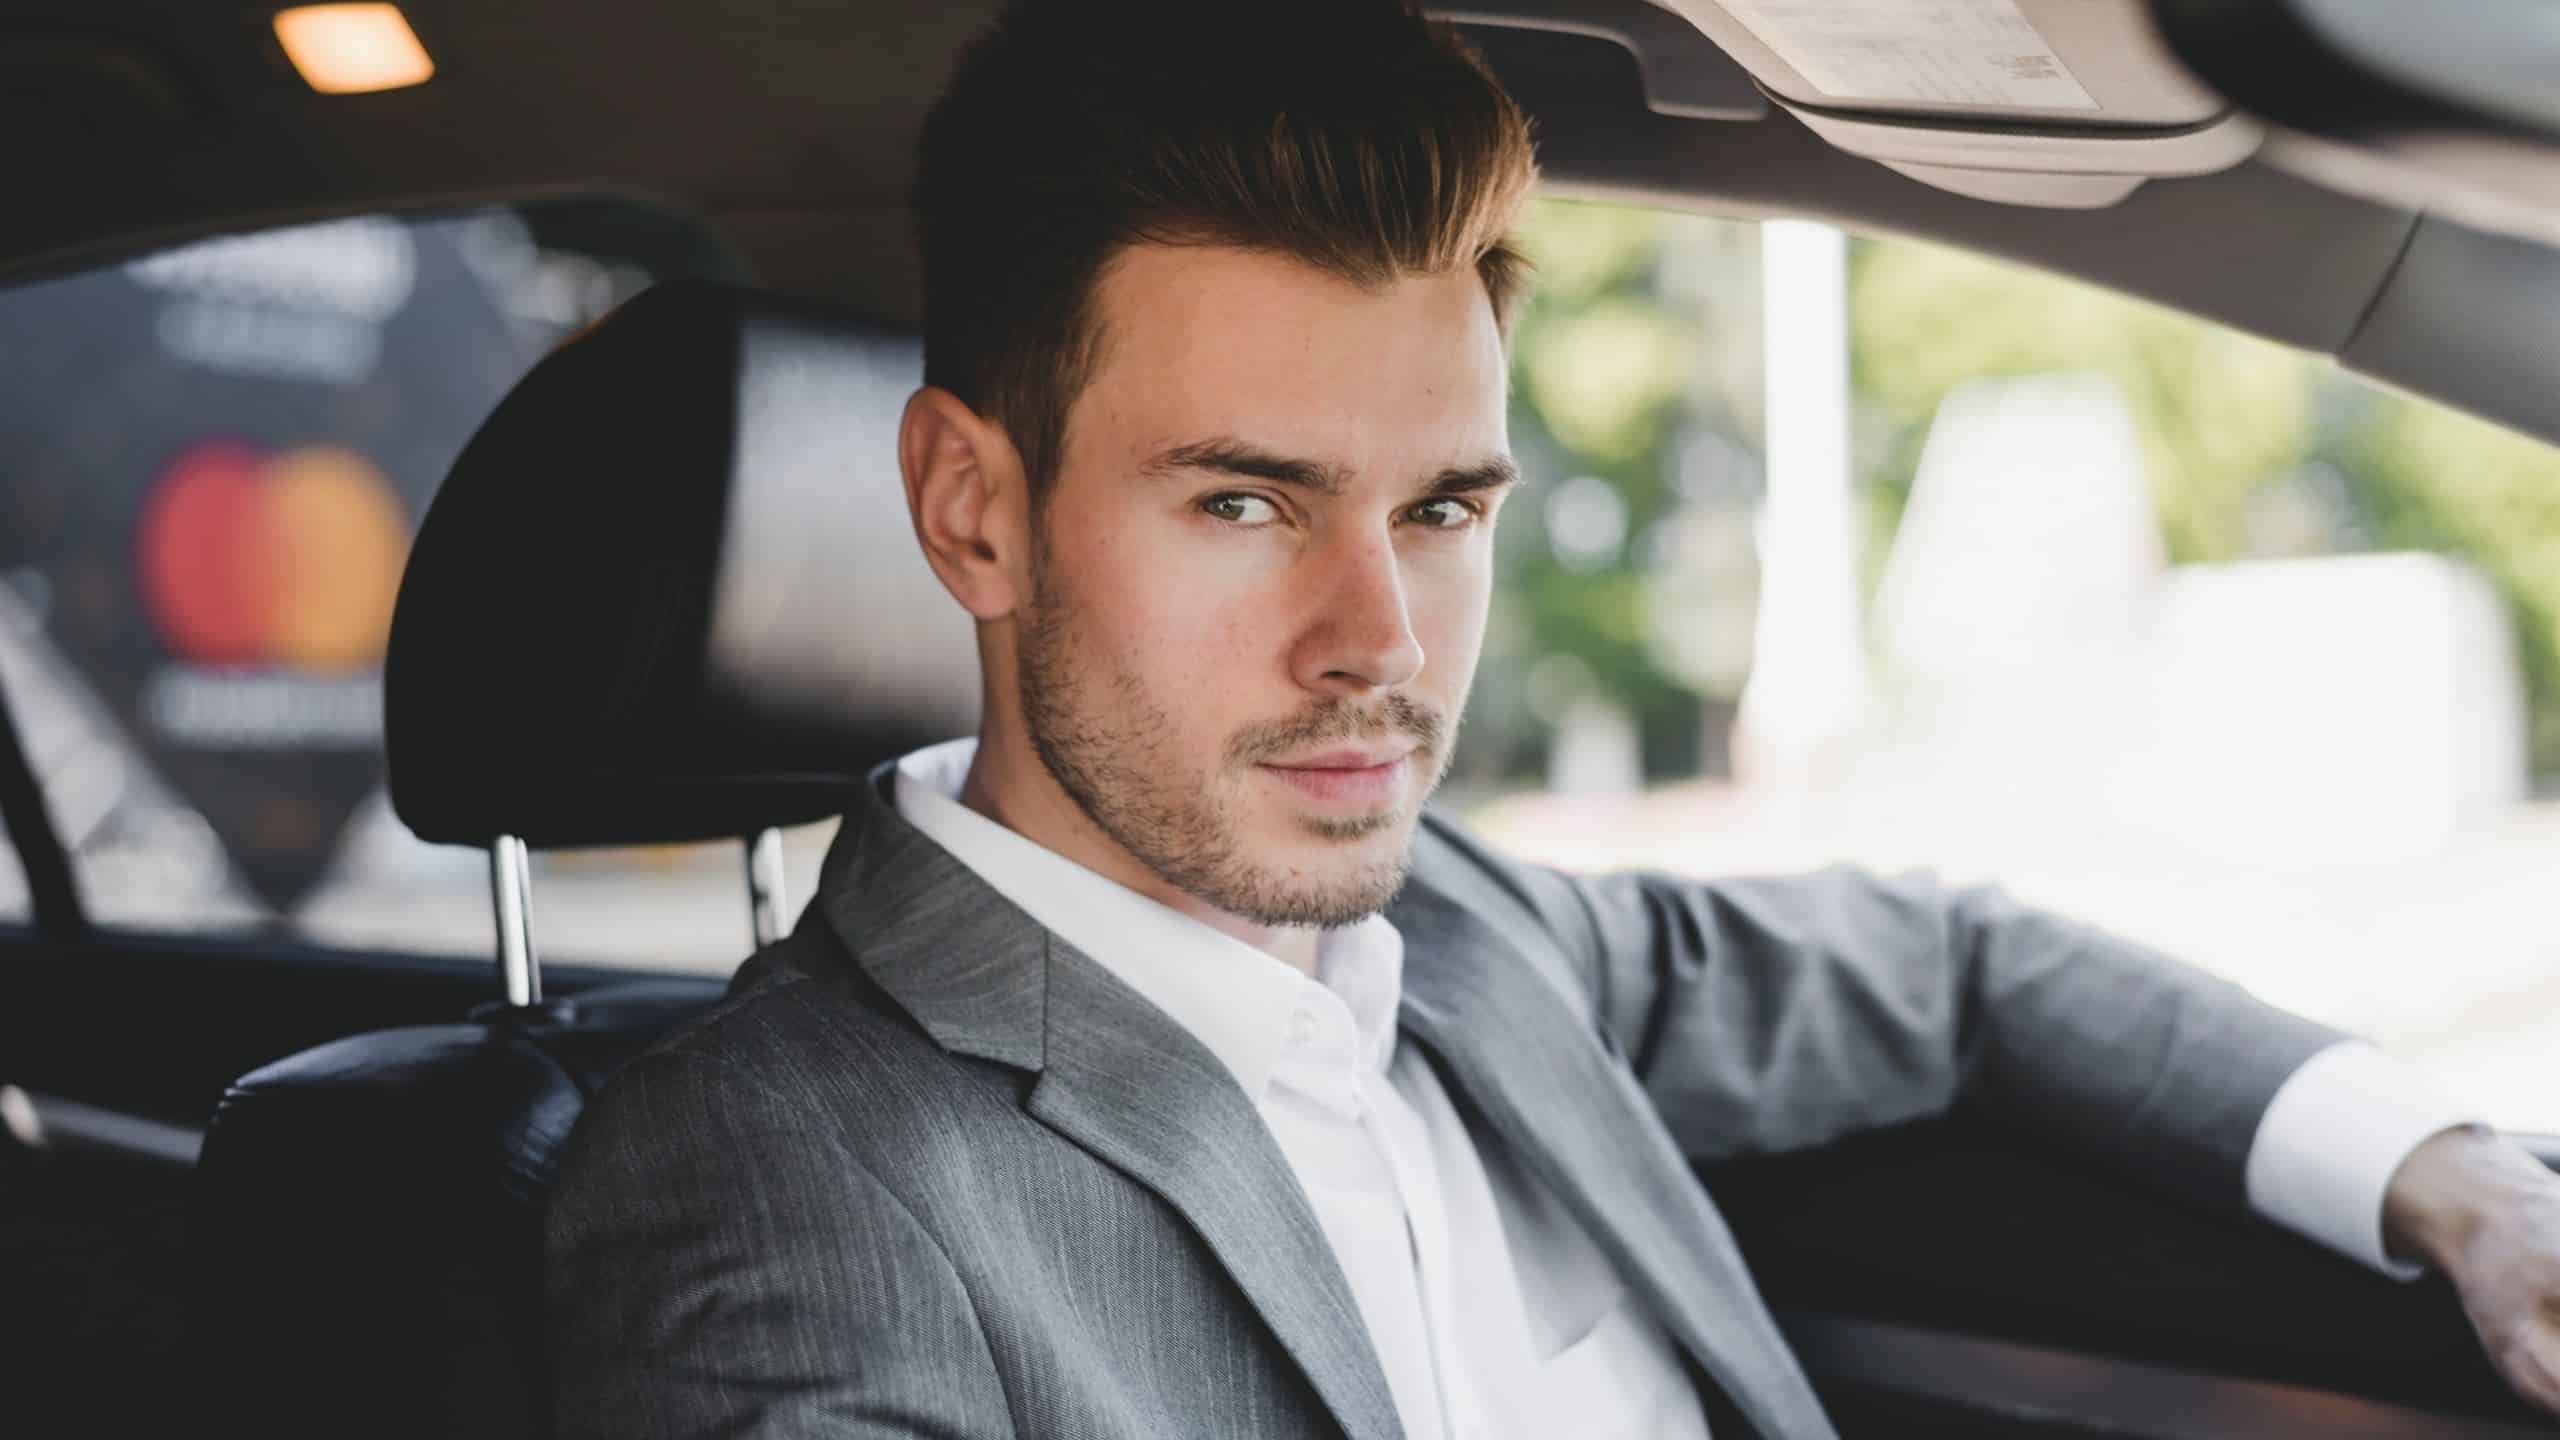 An attractive man wearing a sleek suit sitting in a car.